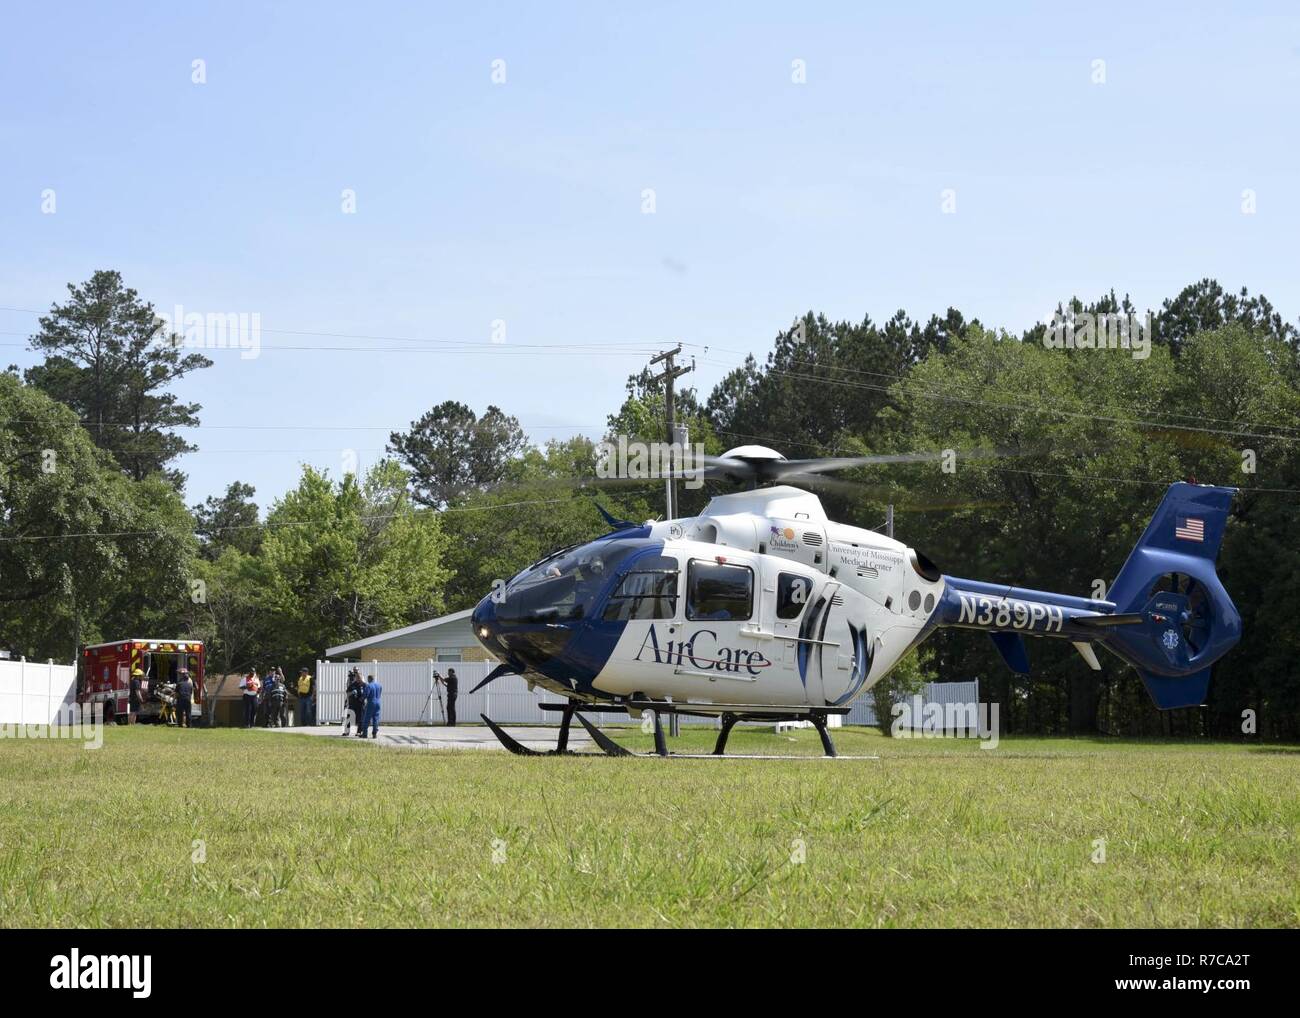 MERIDIAN, Miss. (May 10, 2017) A University of Mississippi Medical Center EC-135 AirCare helicopter lands in base housing during the HURREX/Citadel Gale 2017 exercise on board Naval Air Station Meridian. AirCare was one of four outside agencies assisting NAS Meridian personnel during the exercise.  HURREX/Citadel Gale 2017 is an annual exercise which prepares the Navy to respond to adverse weather threats in U.S. coastal regions, and to maintain the ability to deploy forces even under the most severe weather conditions. Stock Photo